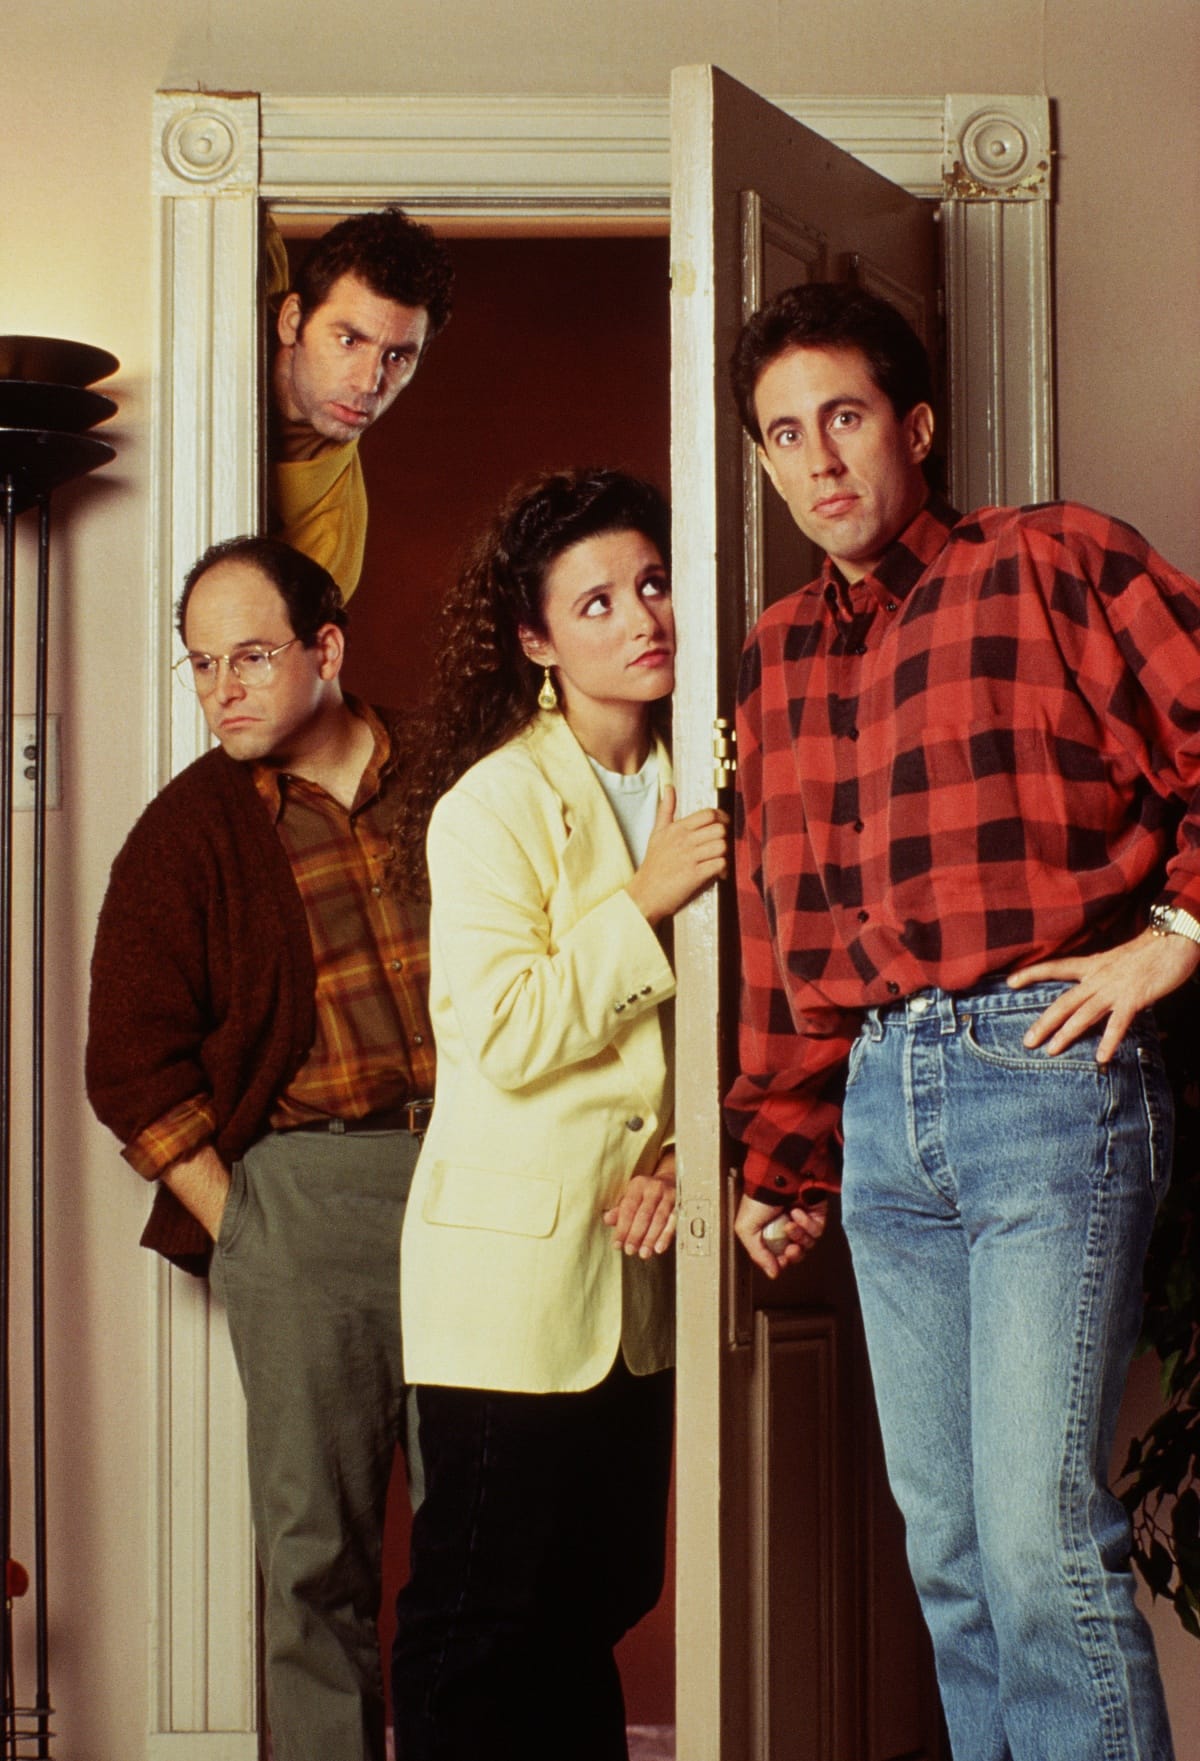 Promo shot of American television sitcom Seinfeld featuring Michael Richards as Cosmo Kramer, Jason Alexander as George Costanza, Julia Louis-Dreyfus as Elaine Benes, and Jerry Seinfeld as Jerry Seinfeld